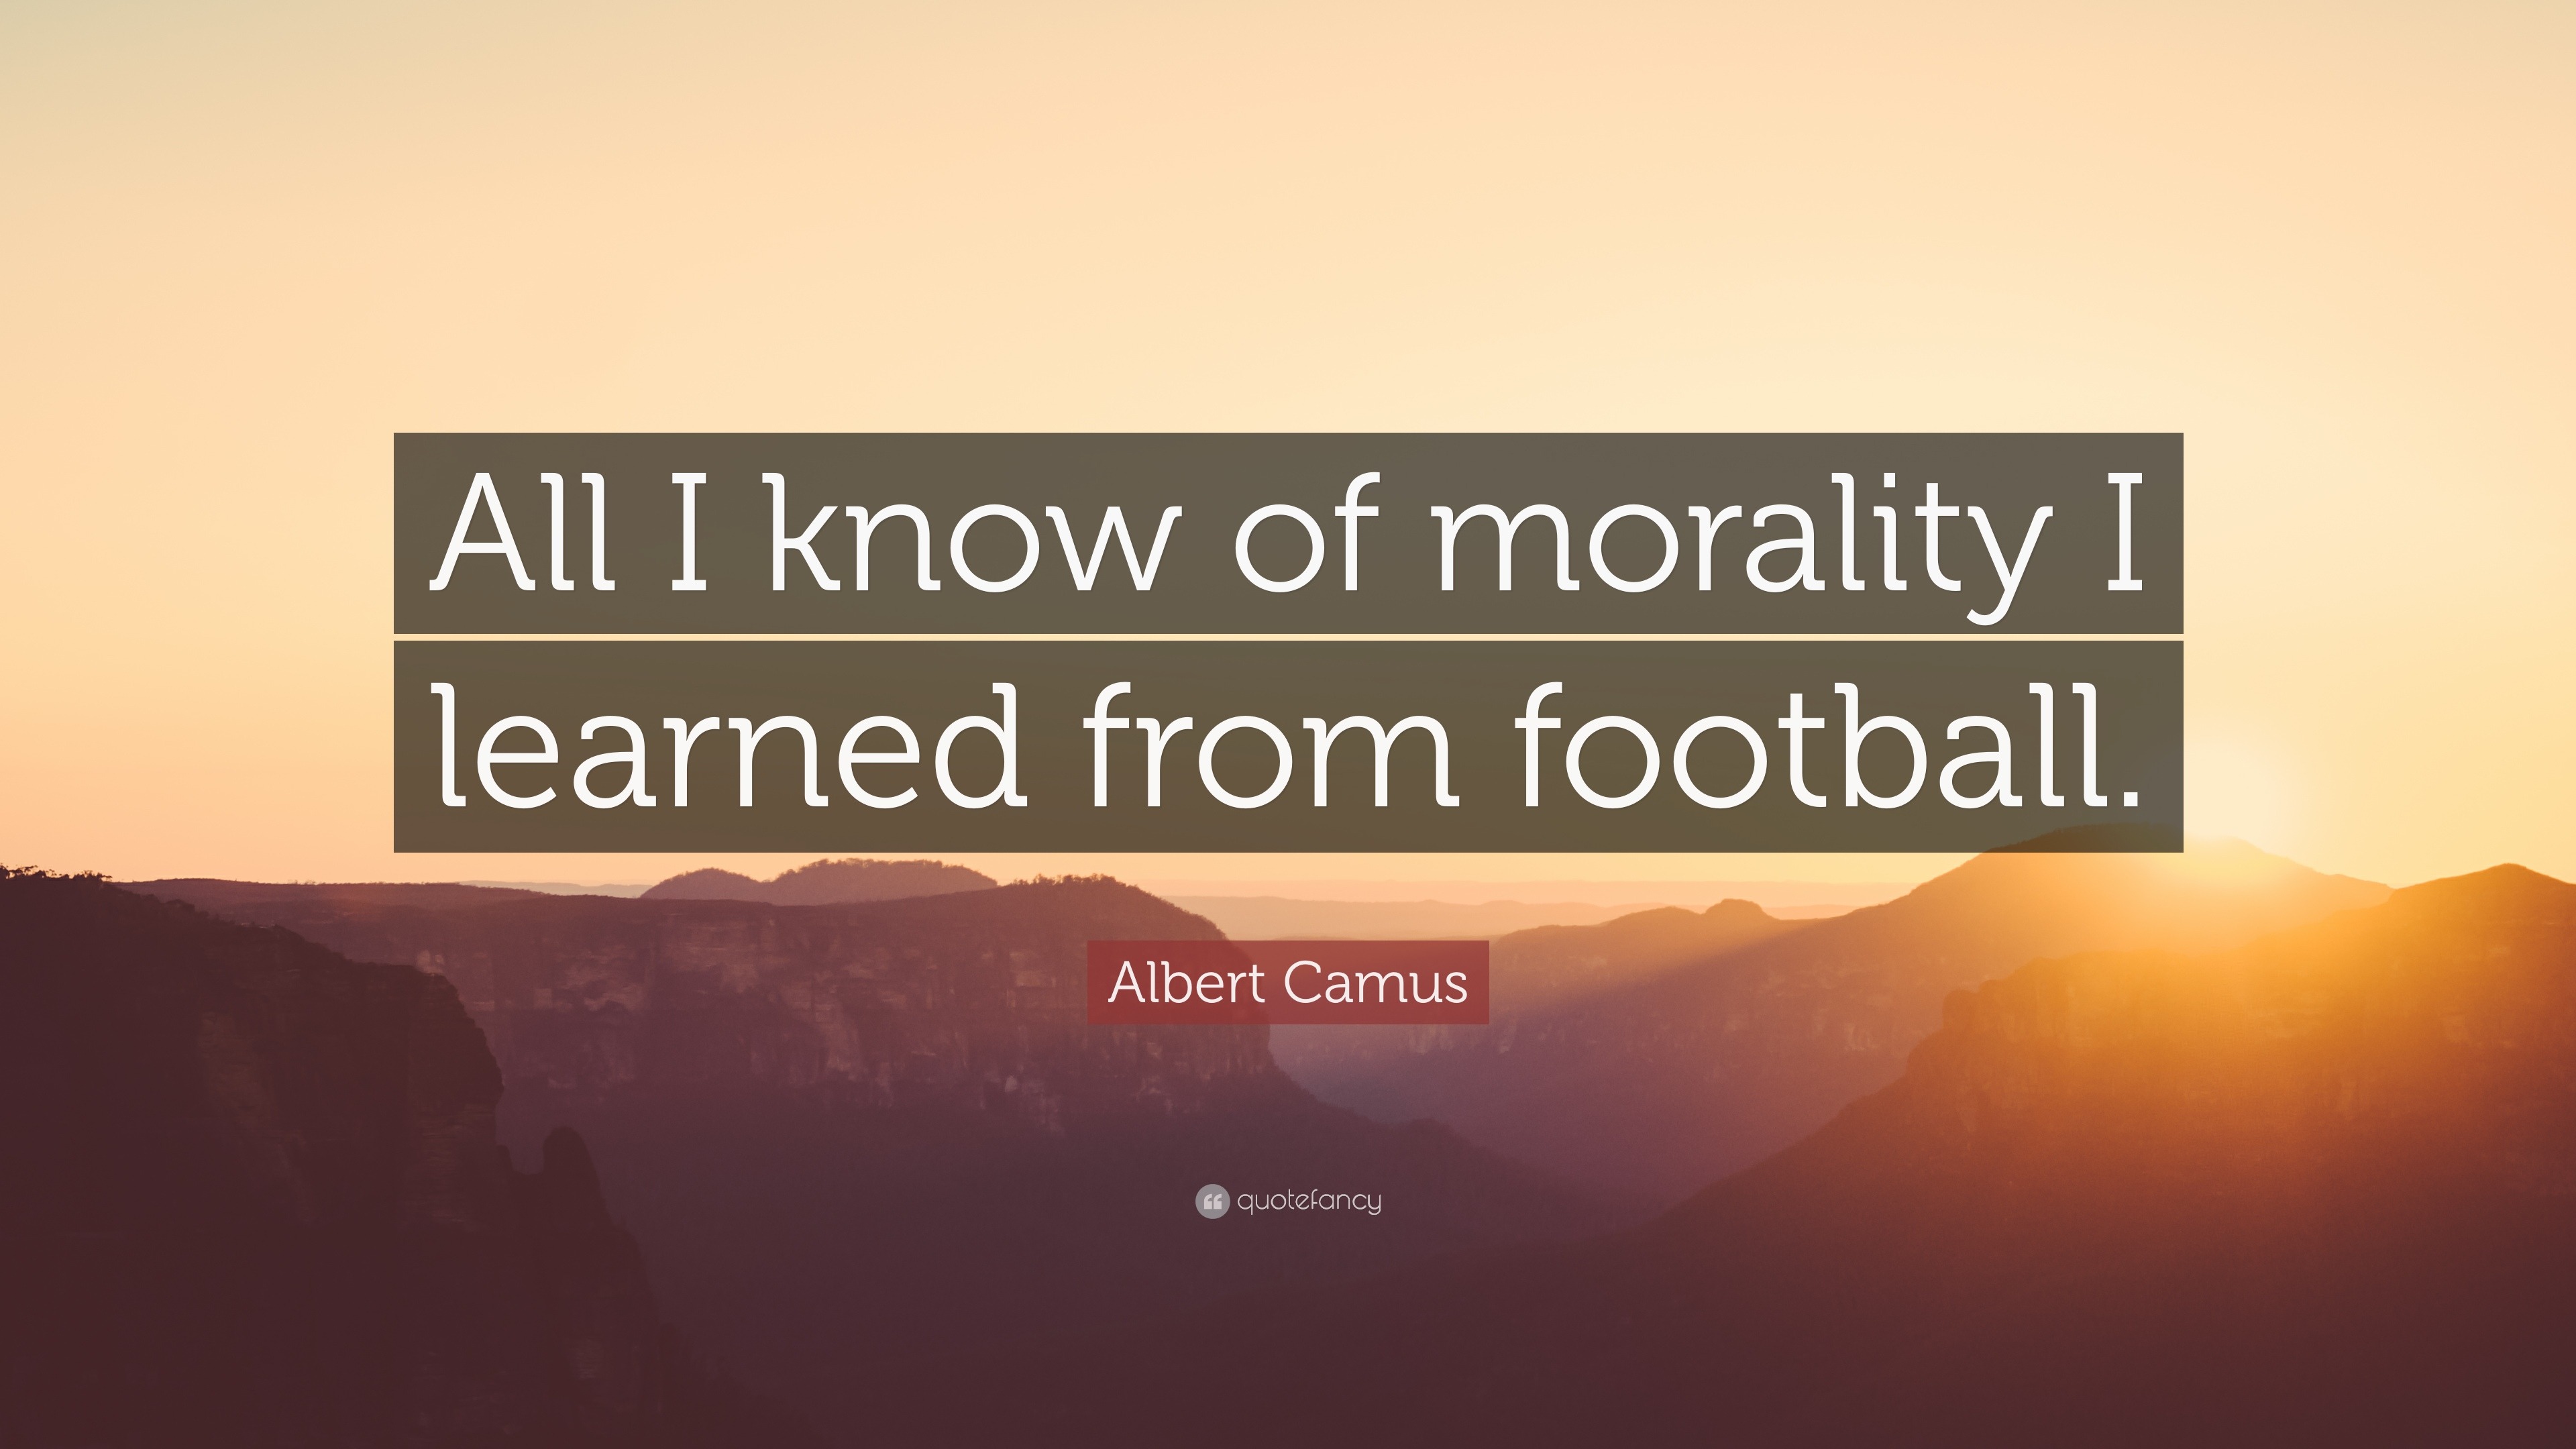 football quotes all i know of morality i learned from football - Football Quotes